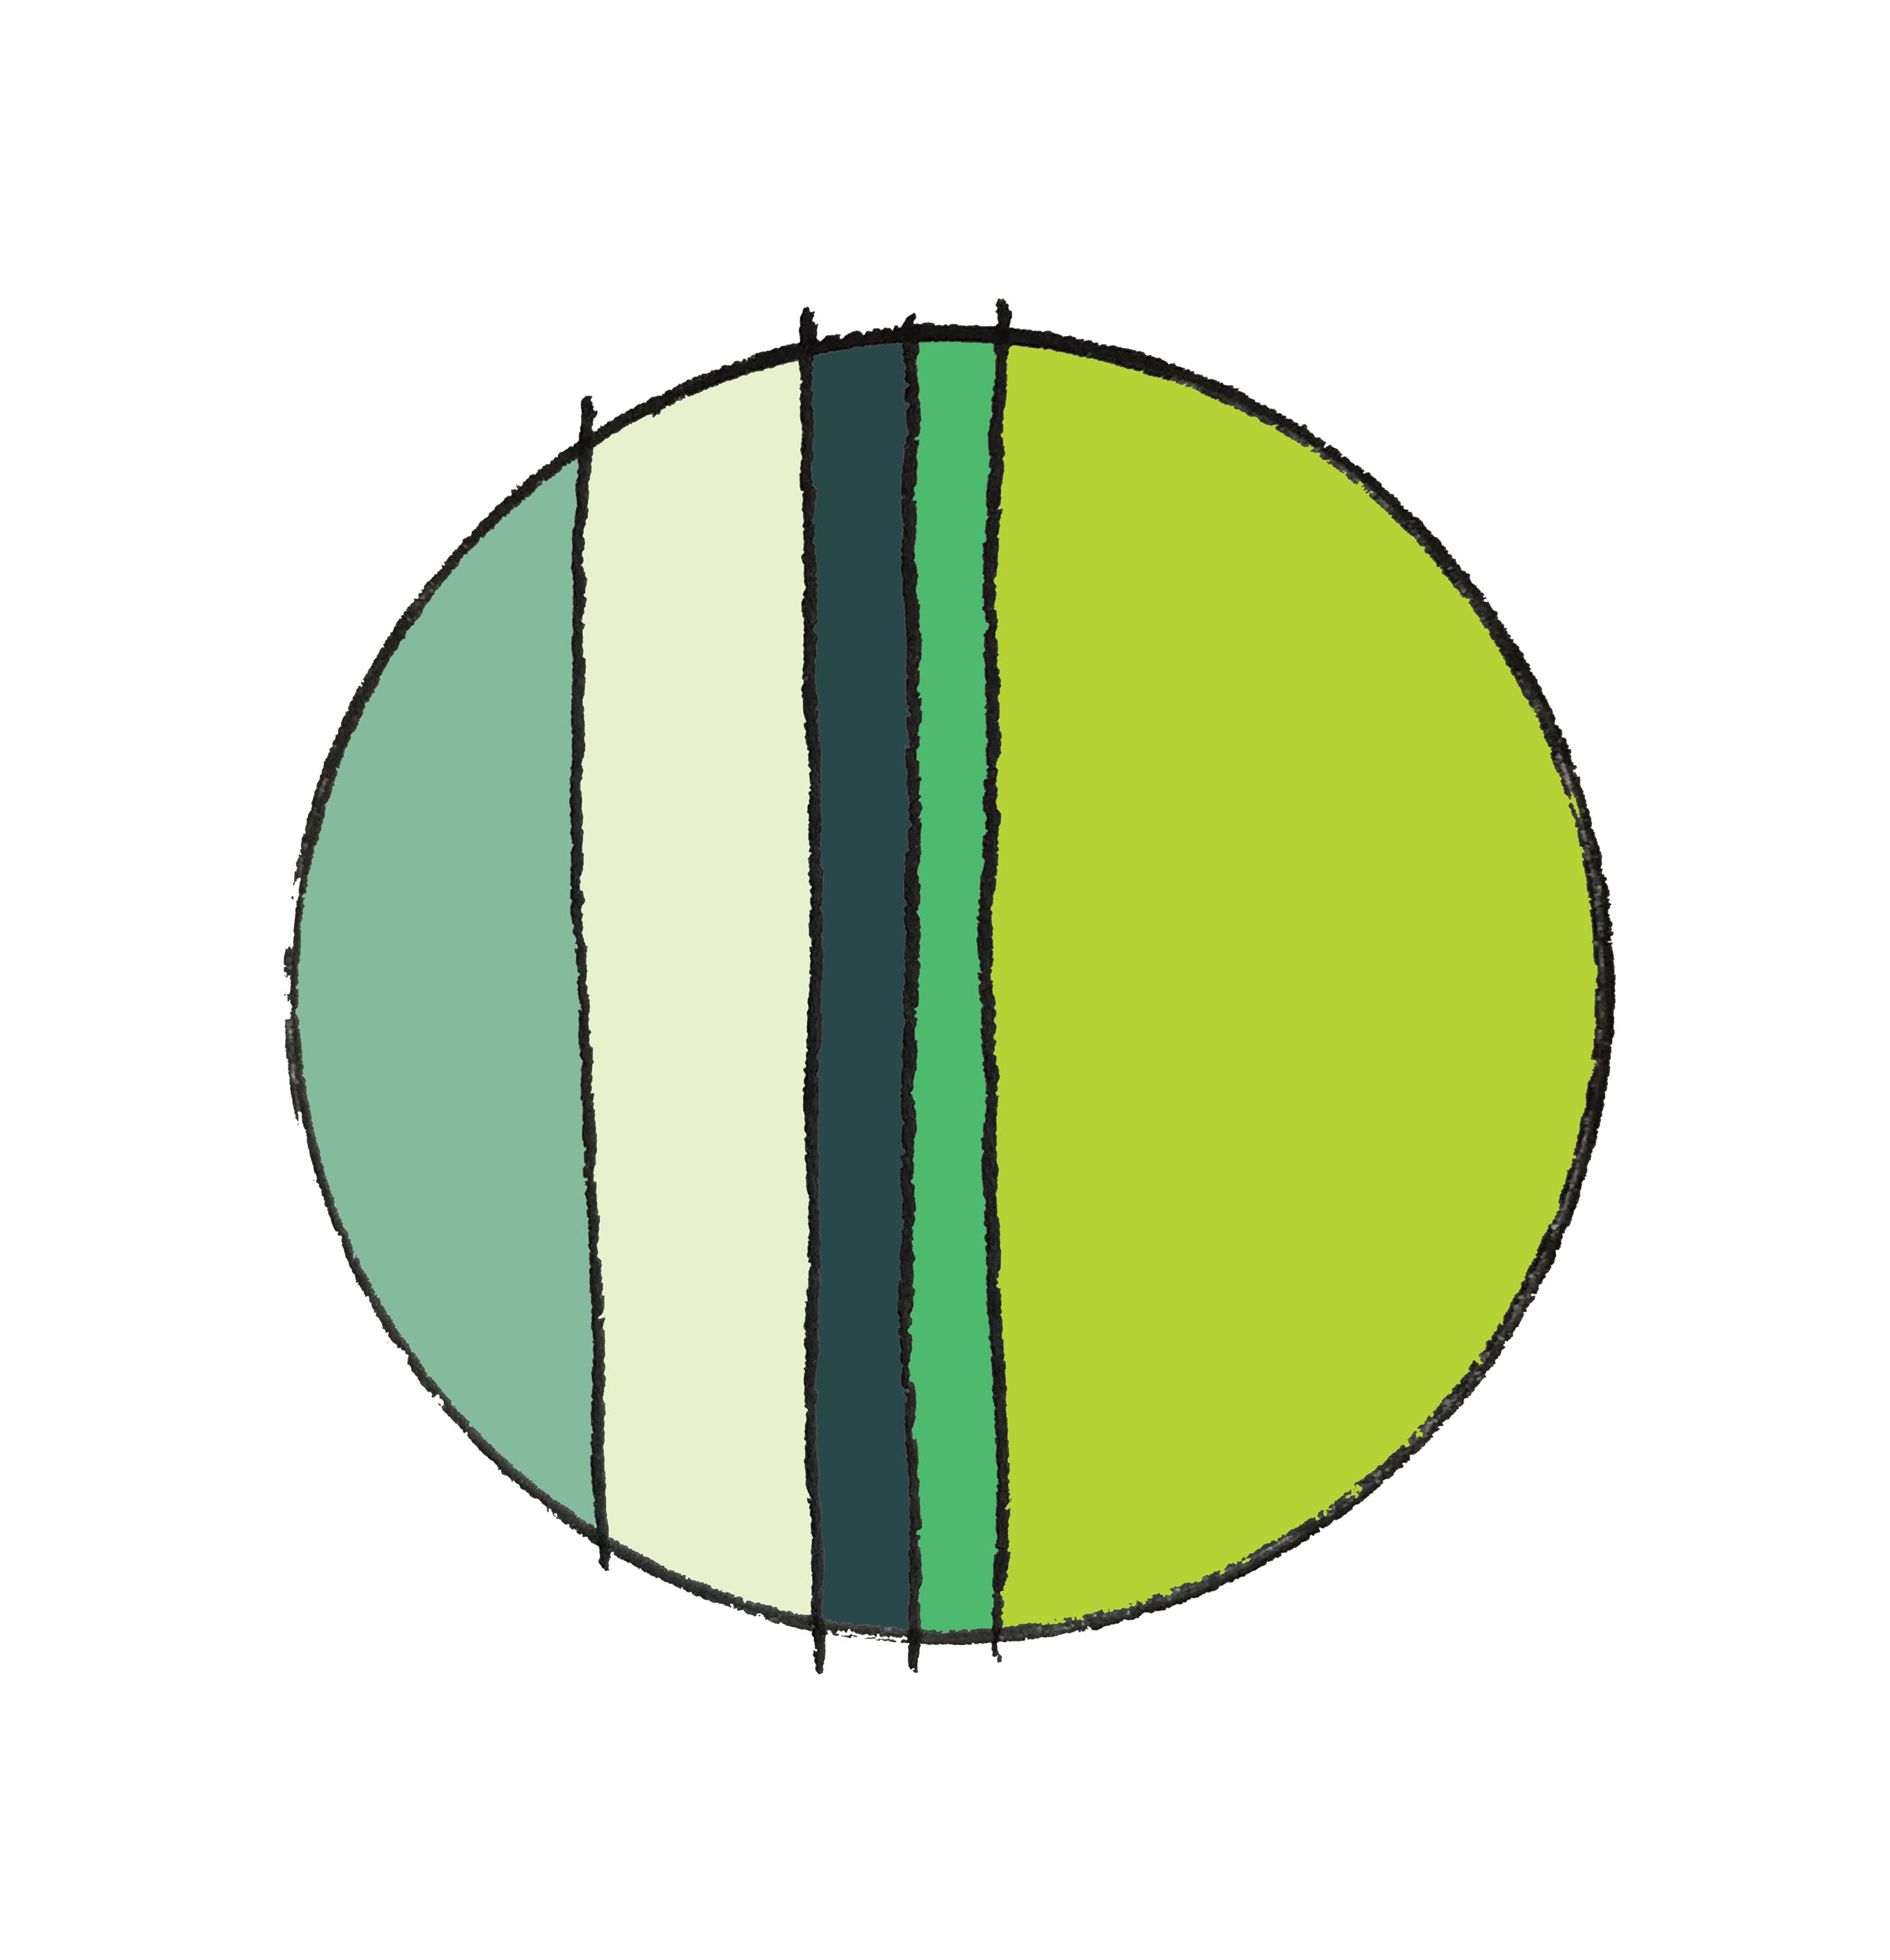 art every day number 323 / colour sketch / green green green 50 09